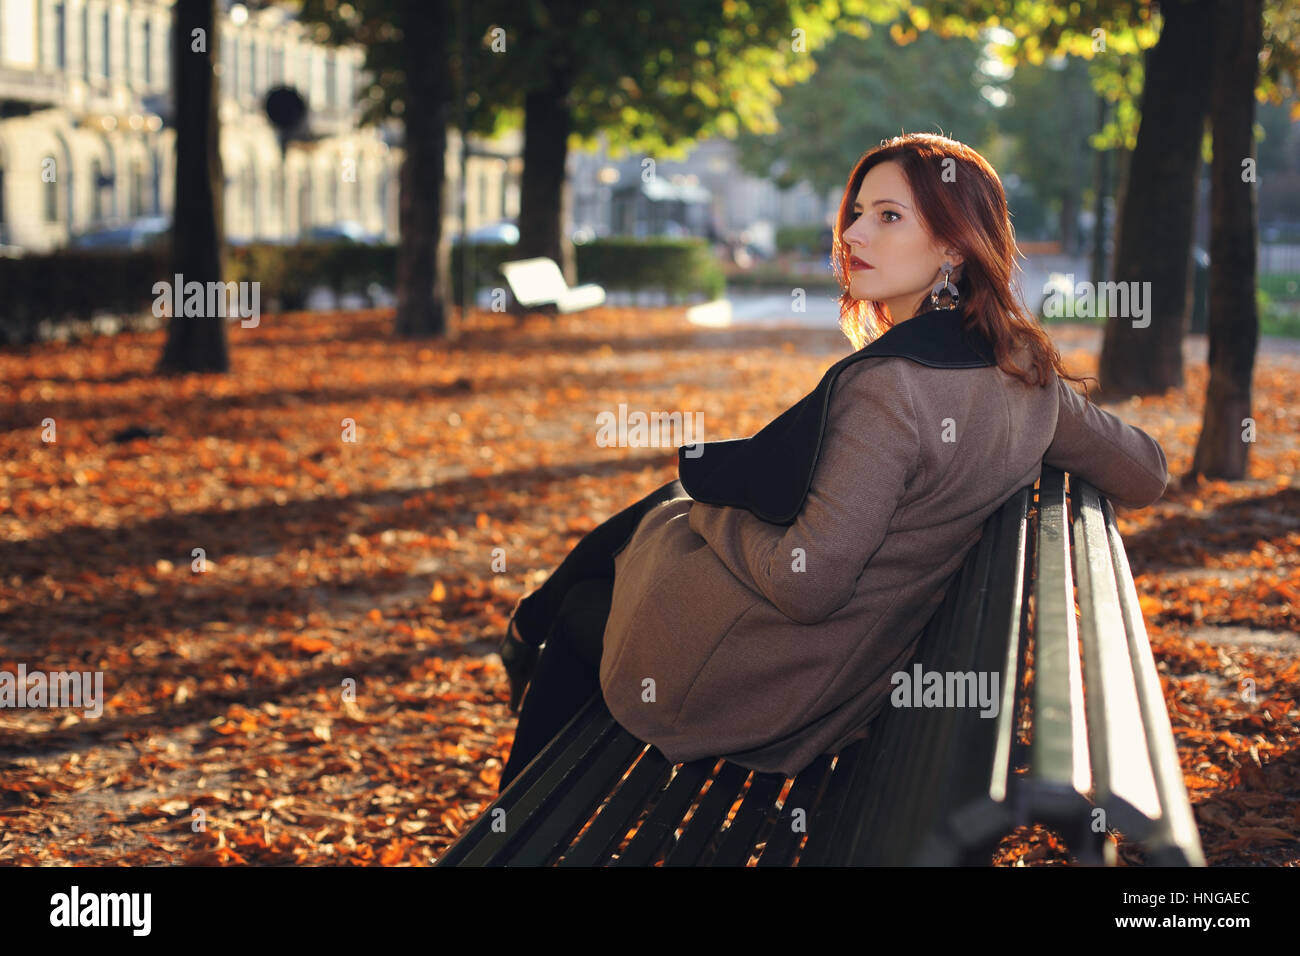 Beautiful red haired woman on a bench at the park Stock Photo